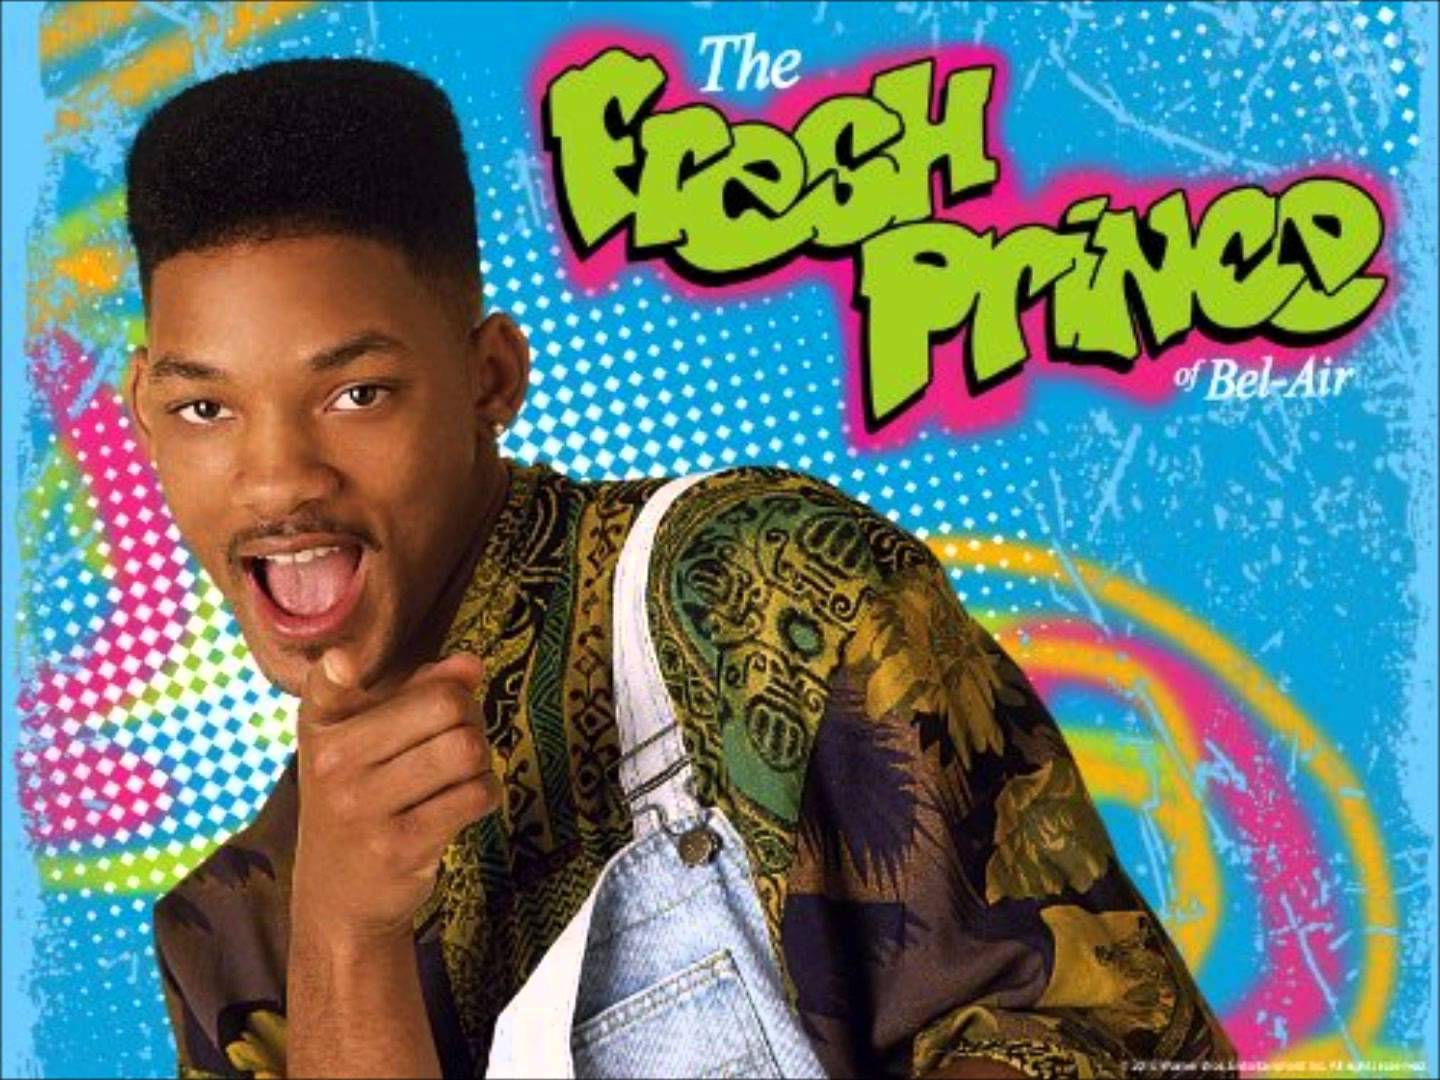 fresh prince of bel air - The of Be